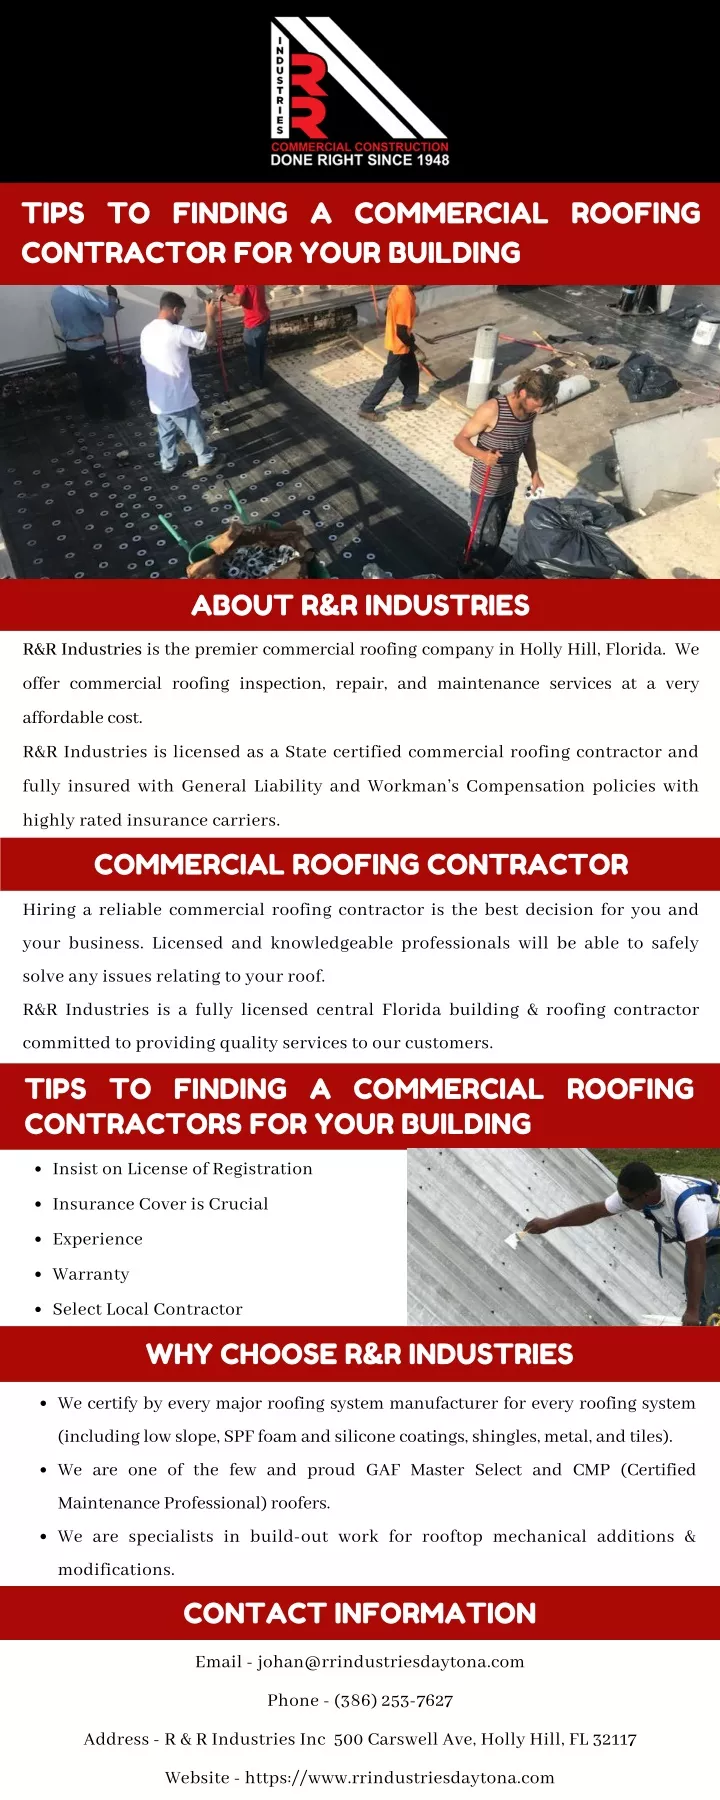 tips to finding a commercial roofing contractor